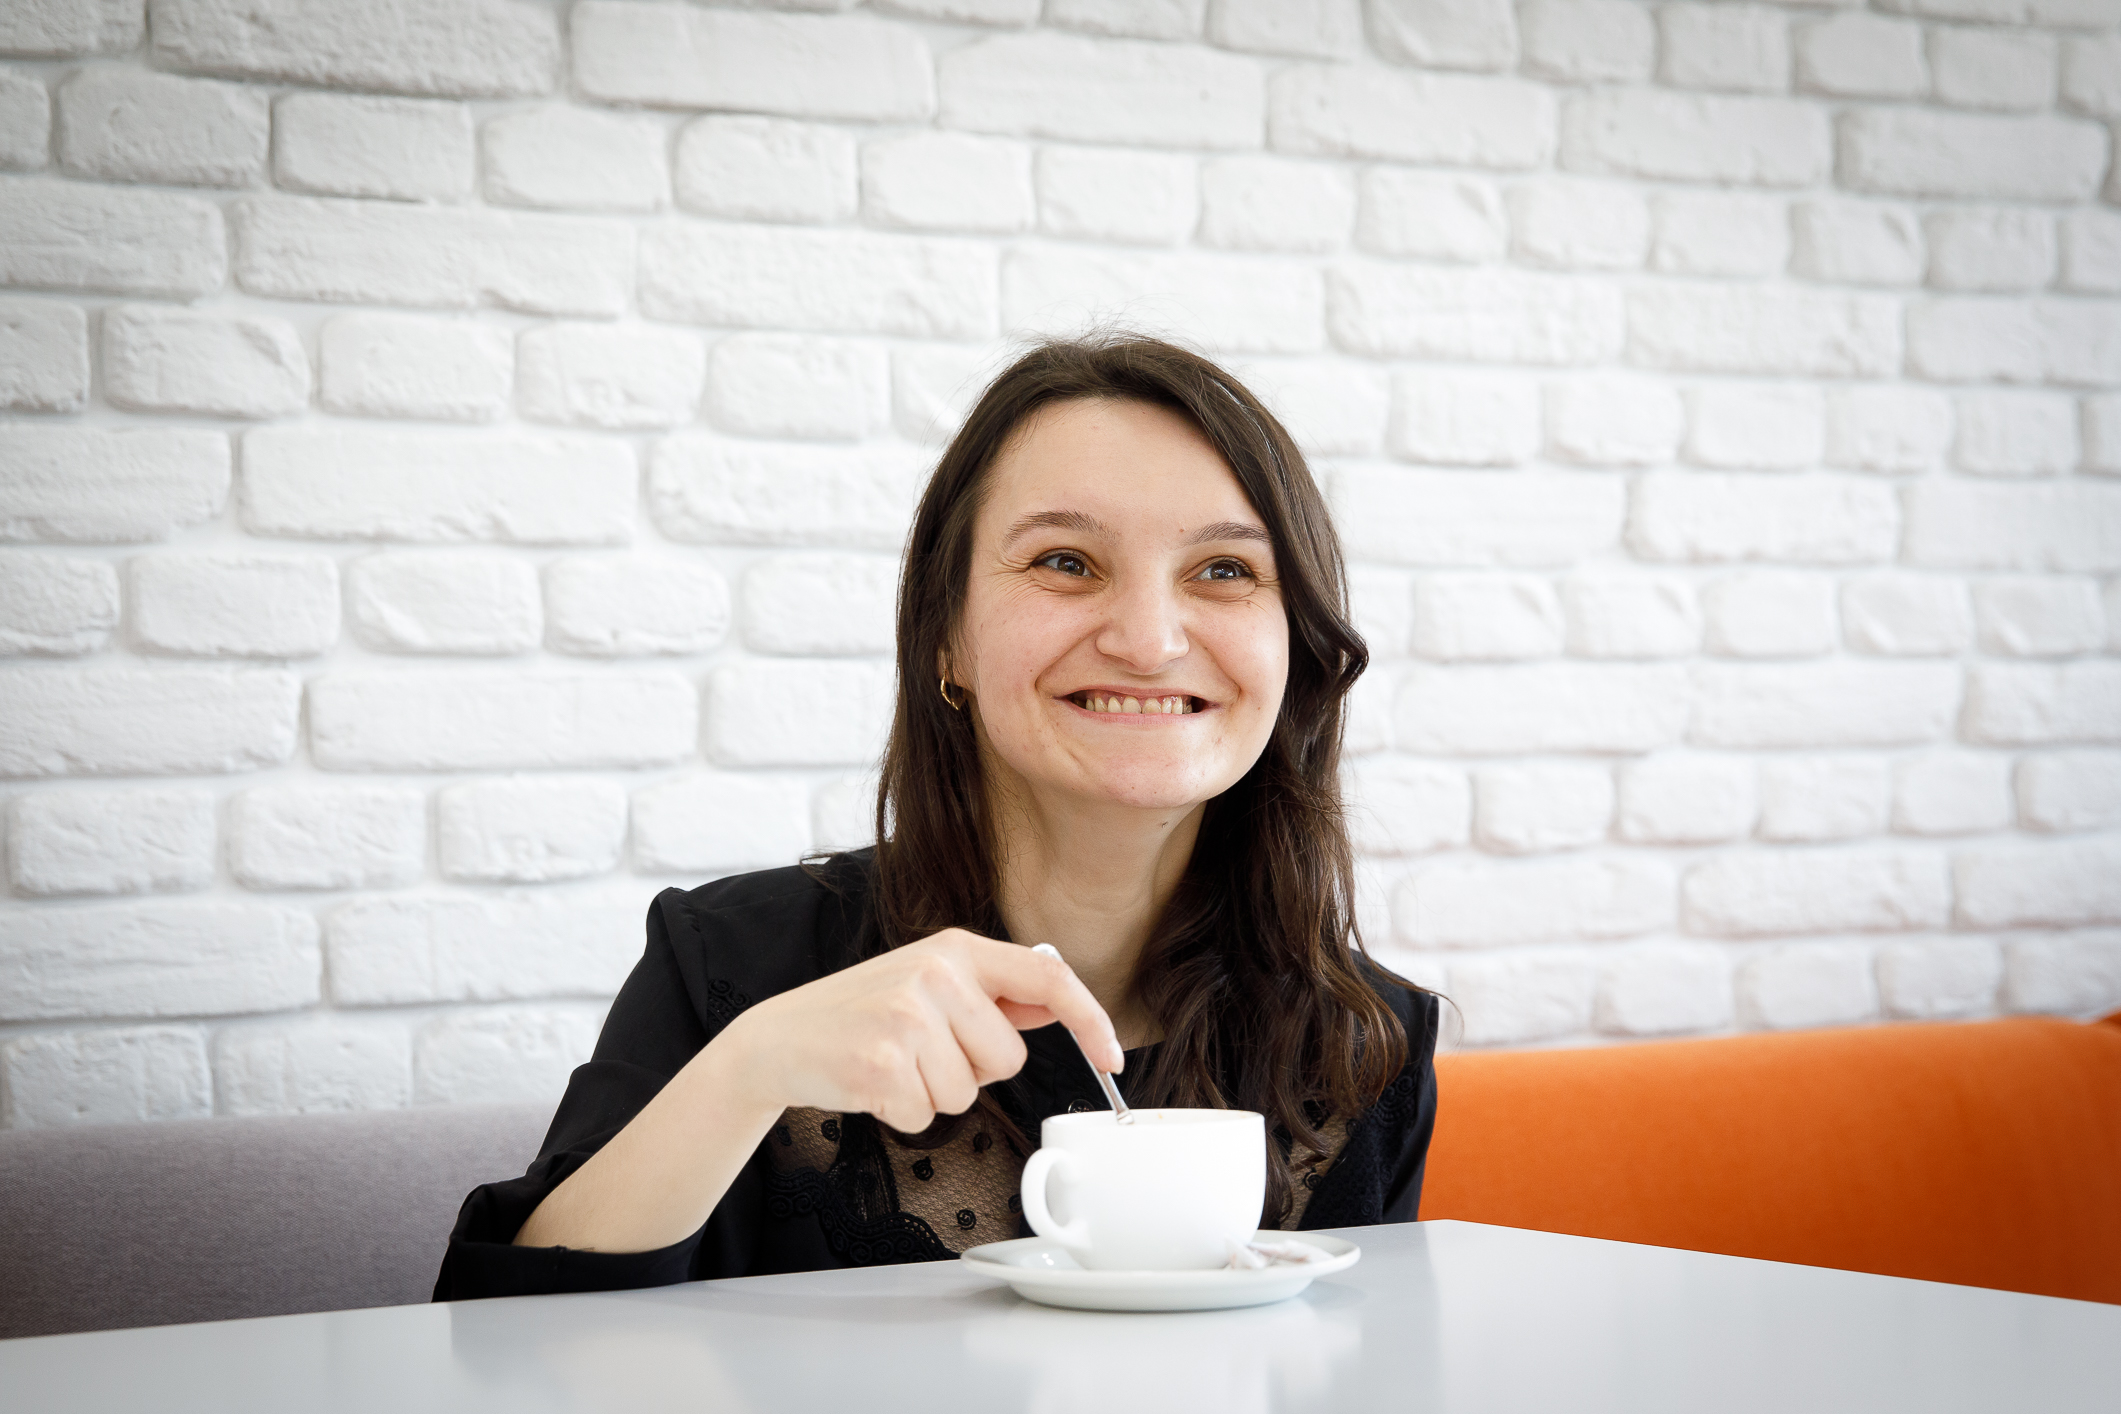 A woman in a black shirt sits at a table with a cup of tea, smiling.